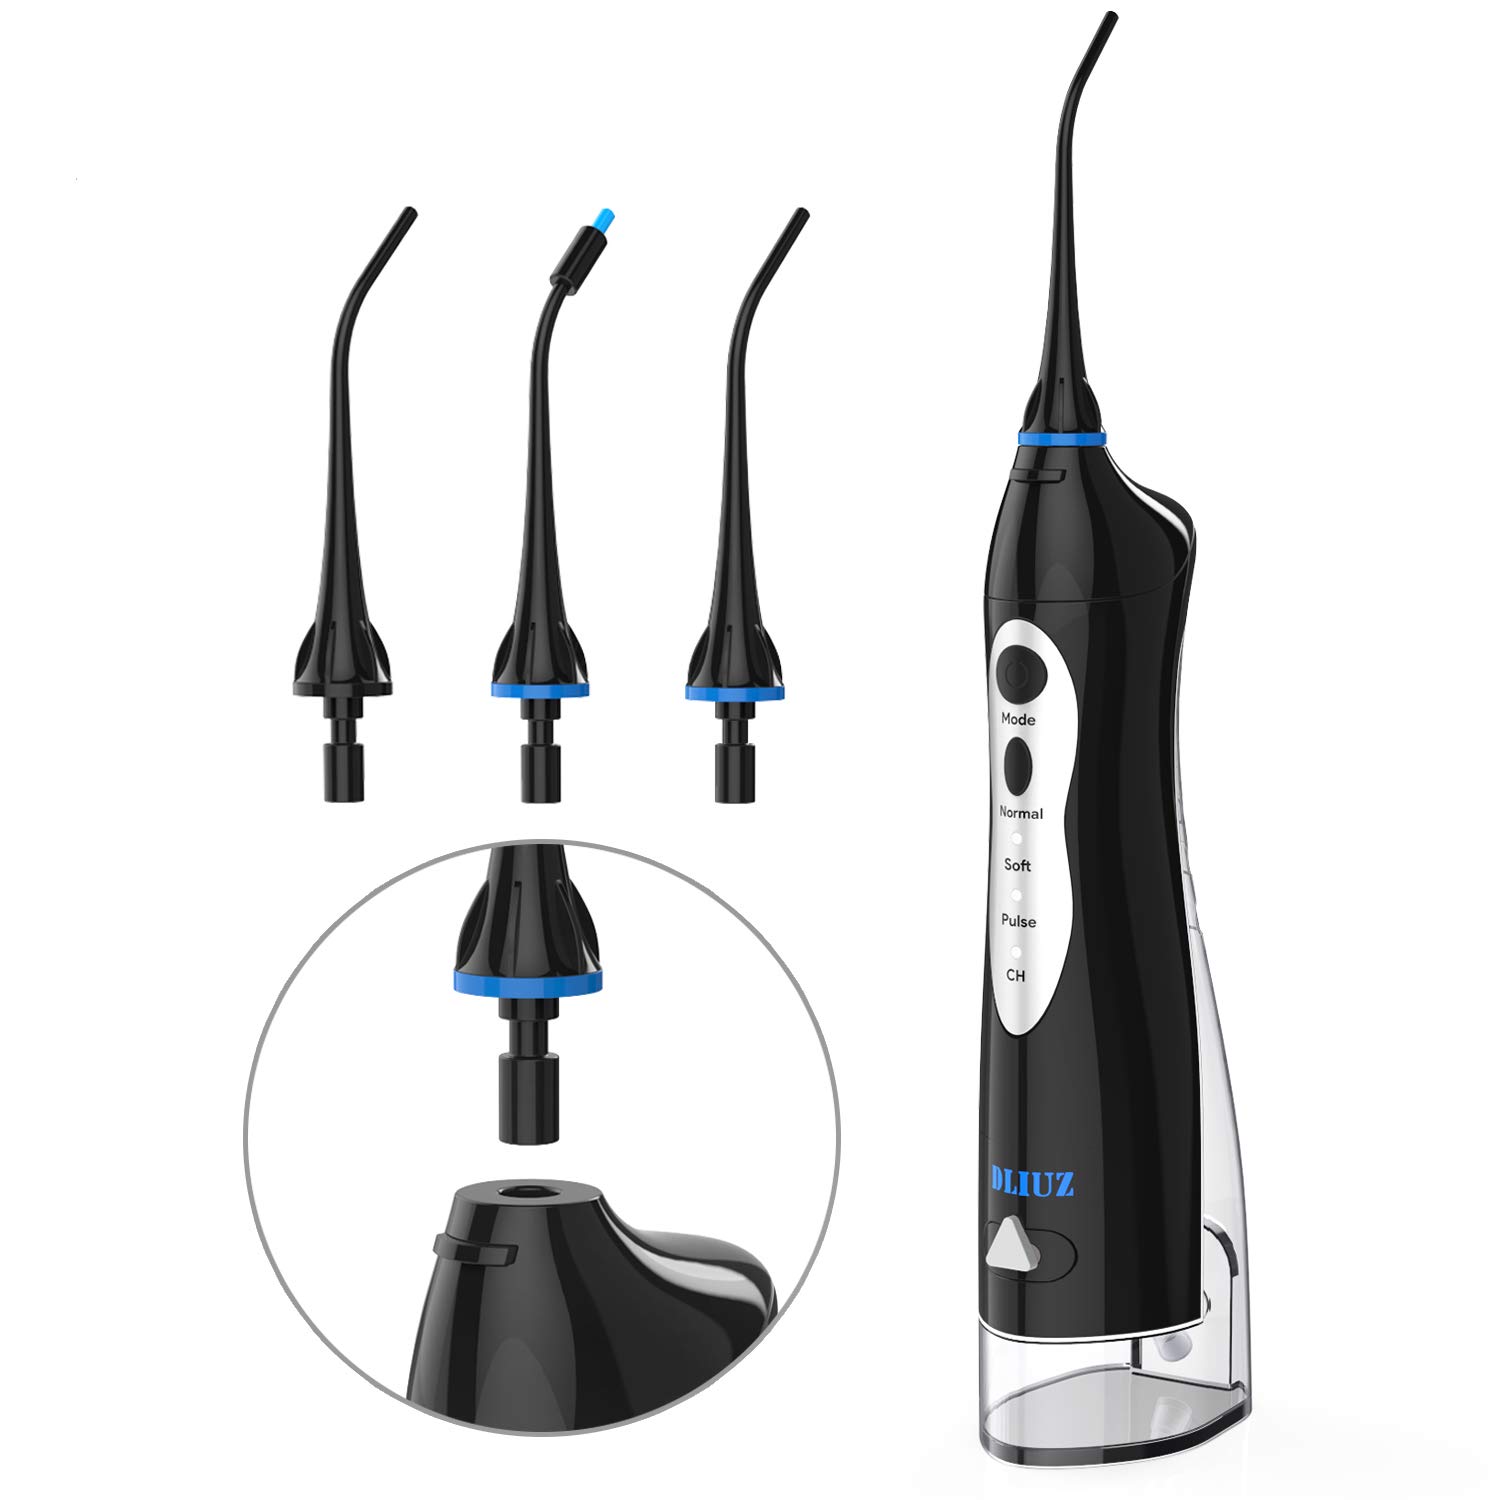 Book Cover DLIUZ 220ml Water Flosser Professional Cordless Dental Oral Irrigator - Portable and Rechargeable FL-V8 Waterproof 3 Modes Water Flossing with 3 Interchange Nozzles for Home and Travel (Black)